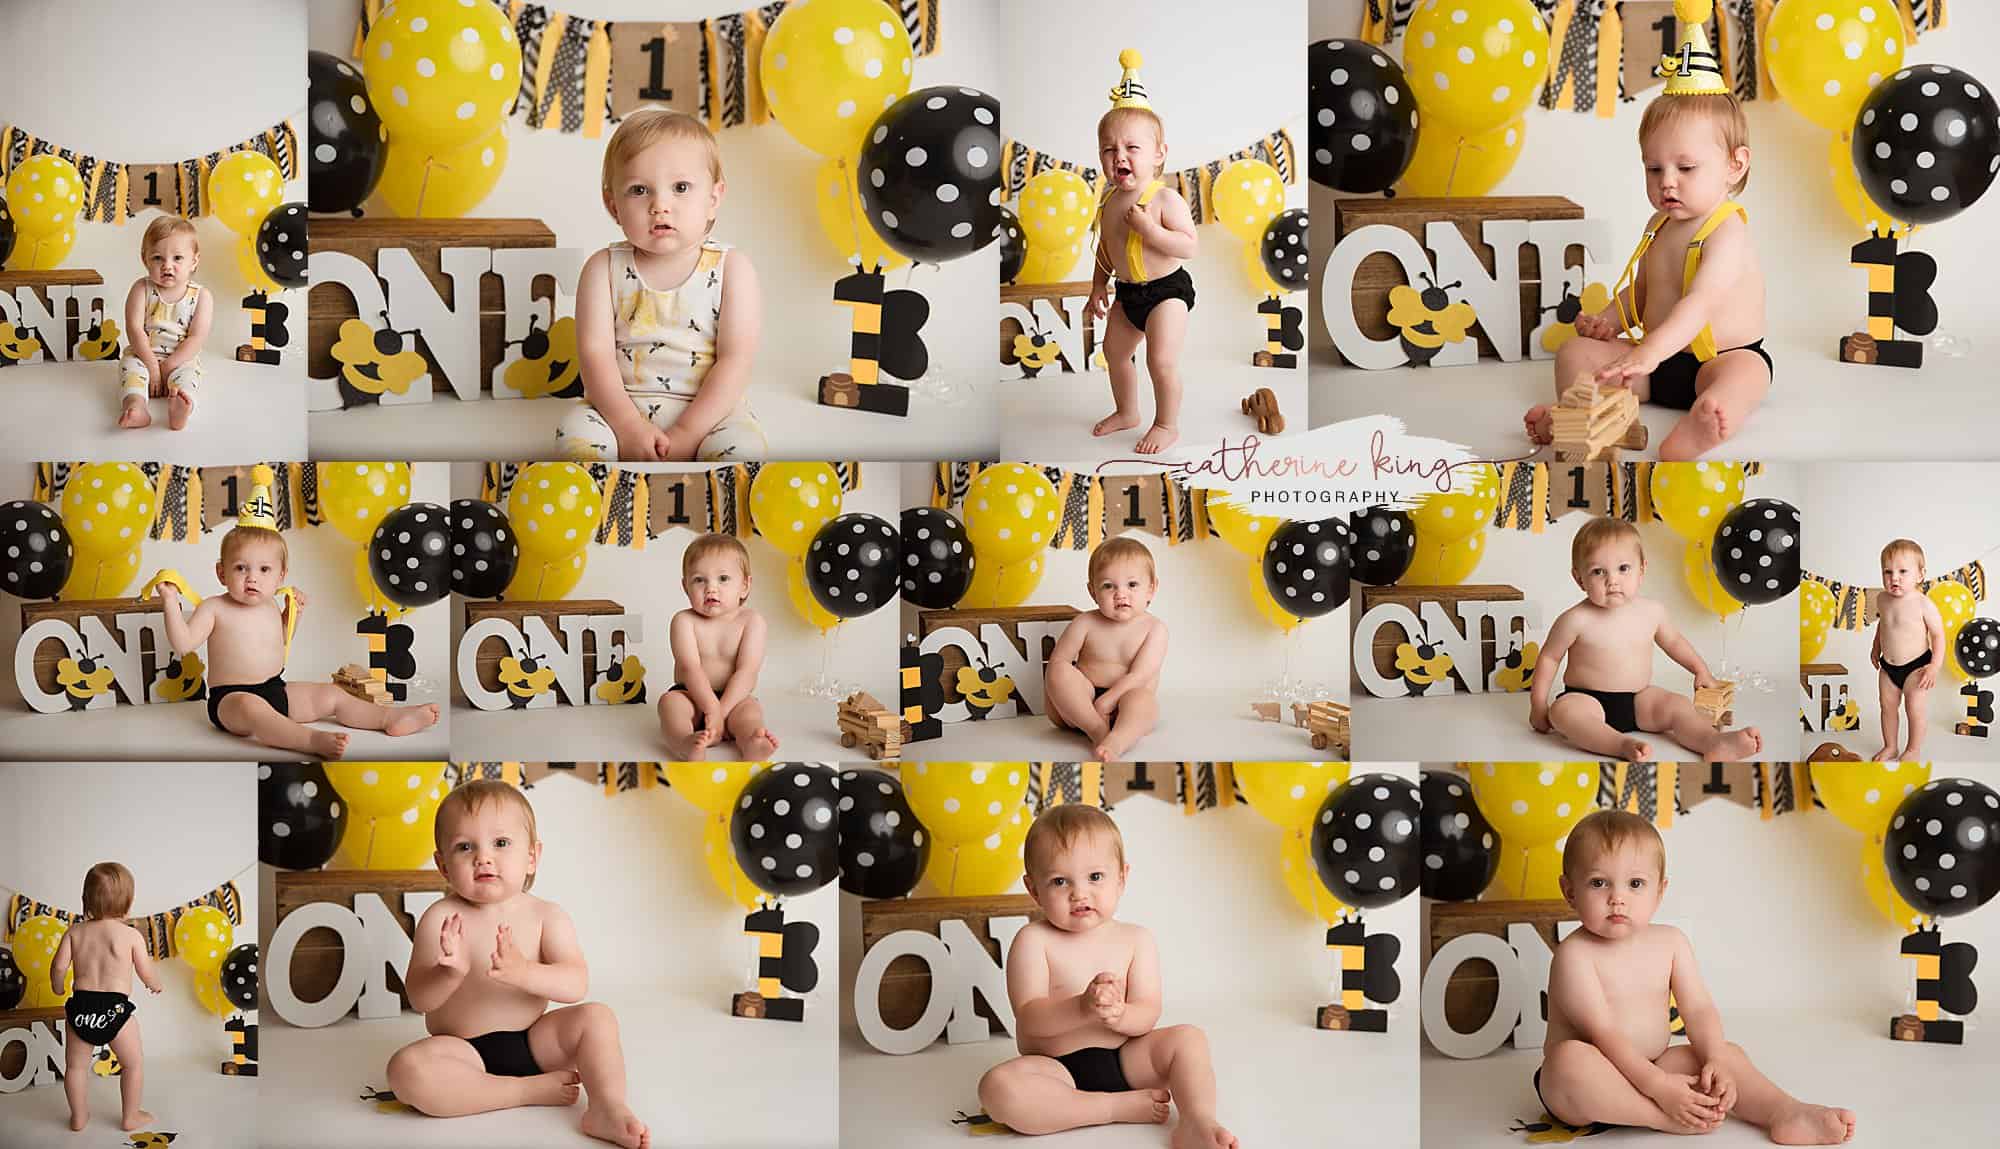 Micah's busy bee first birthday photoshoot